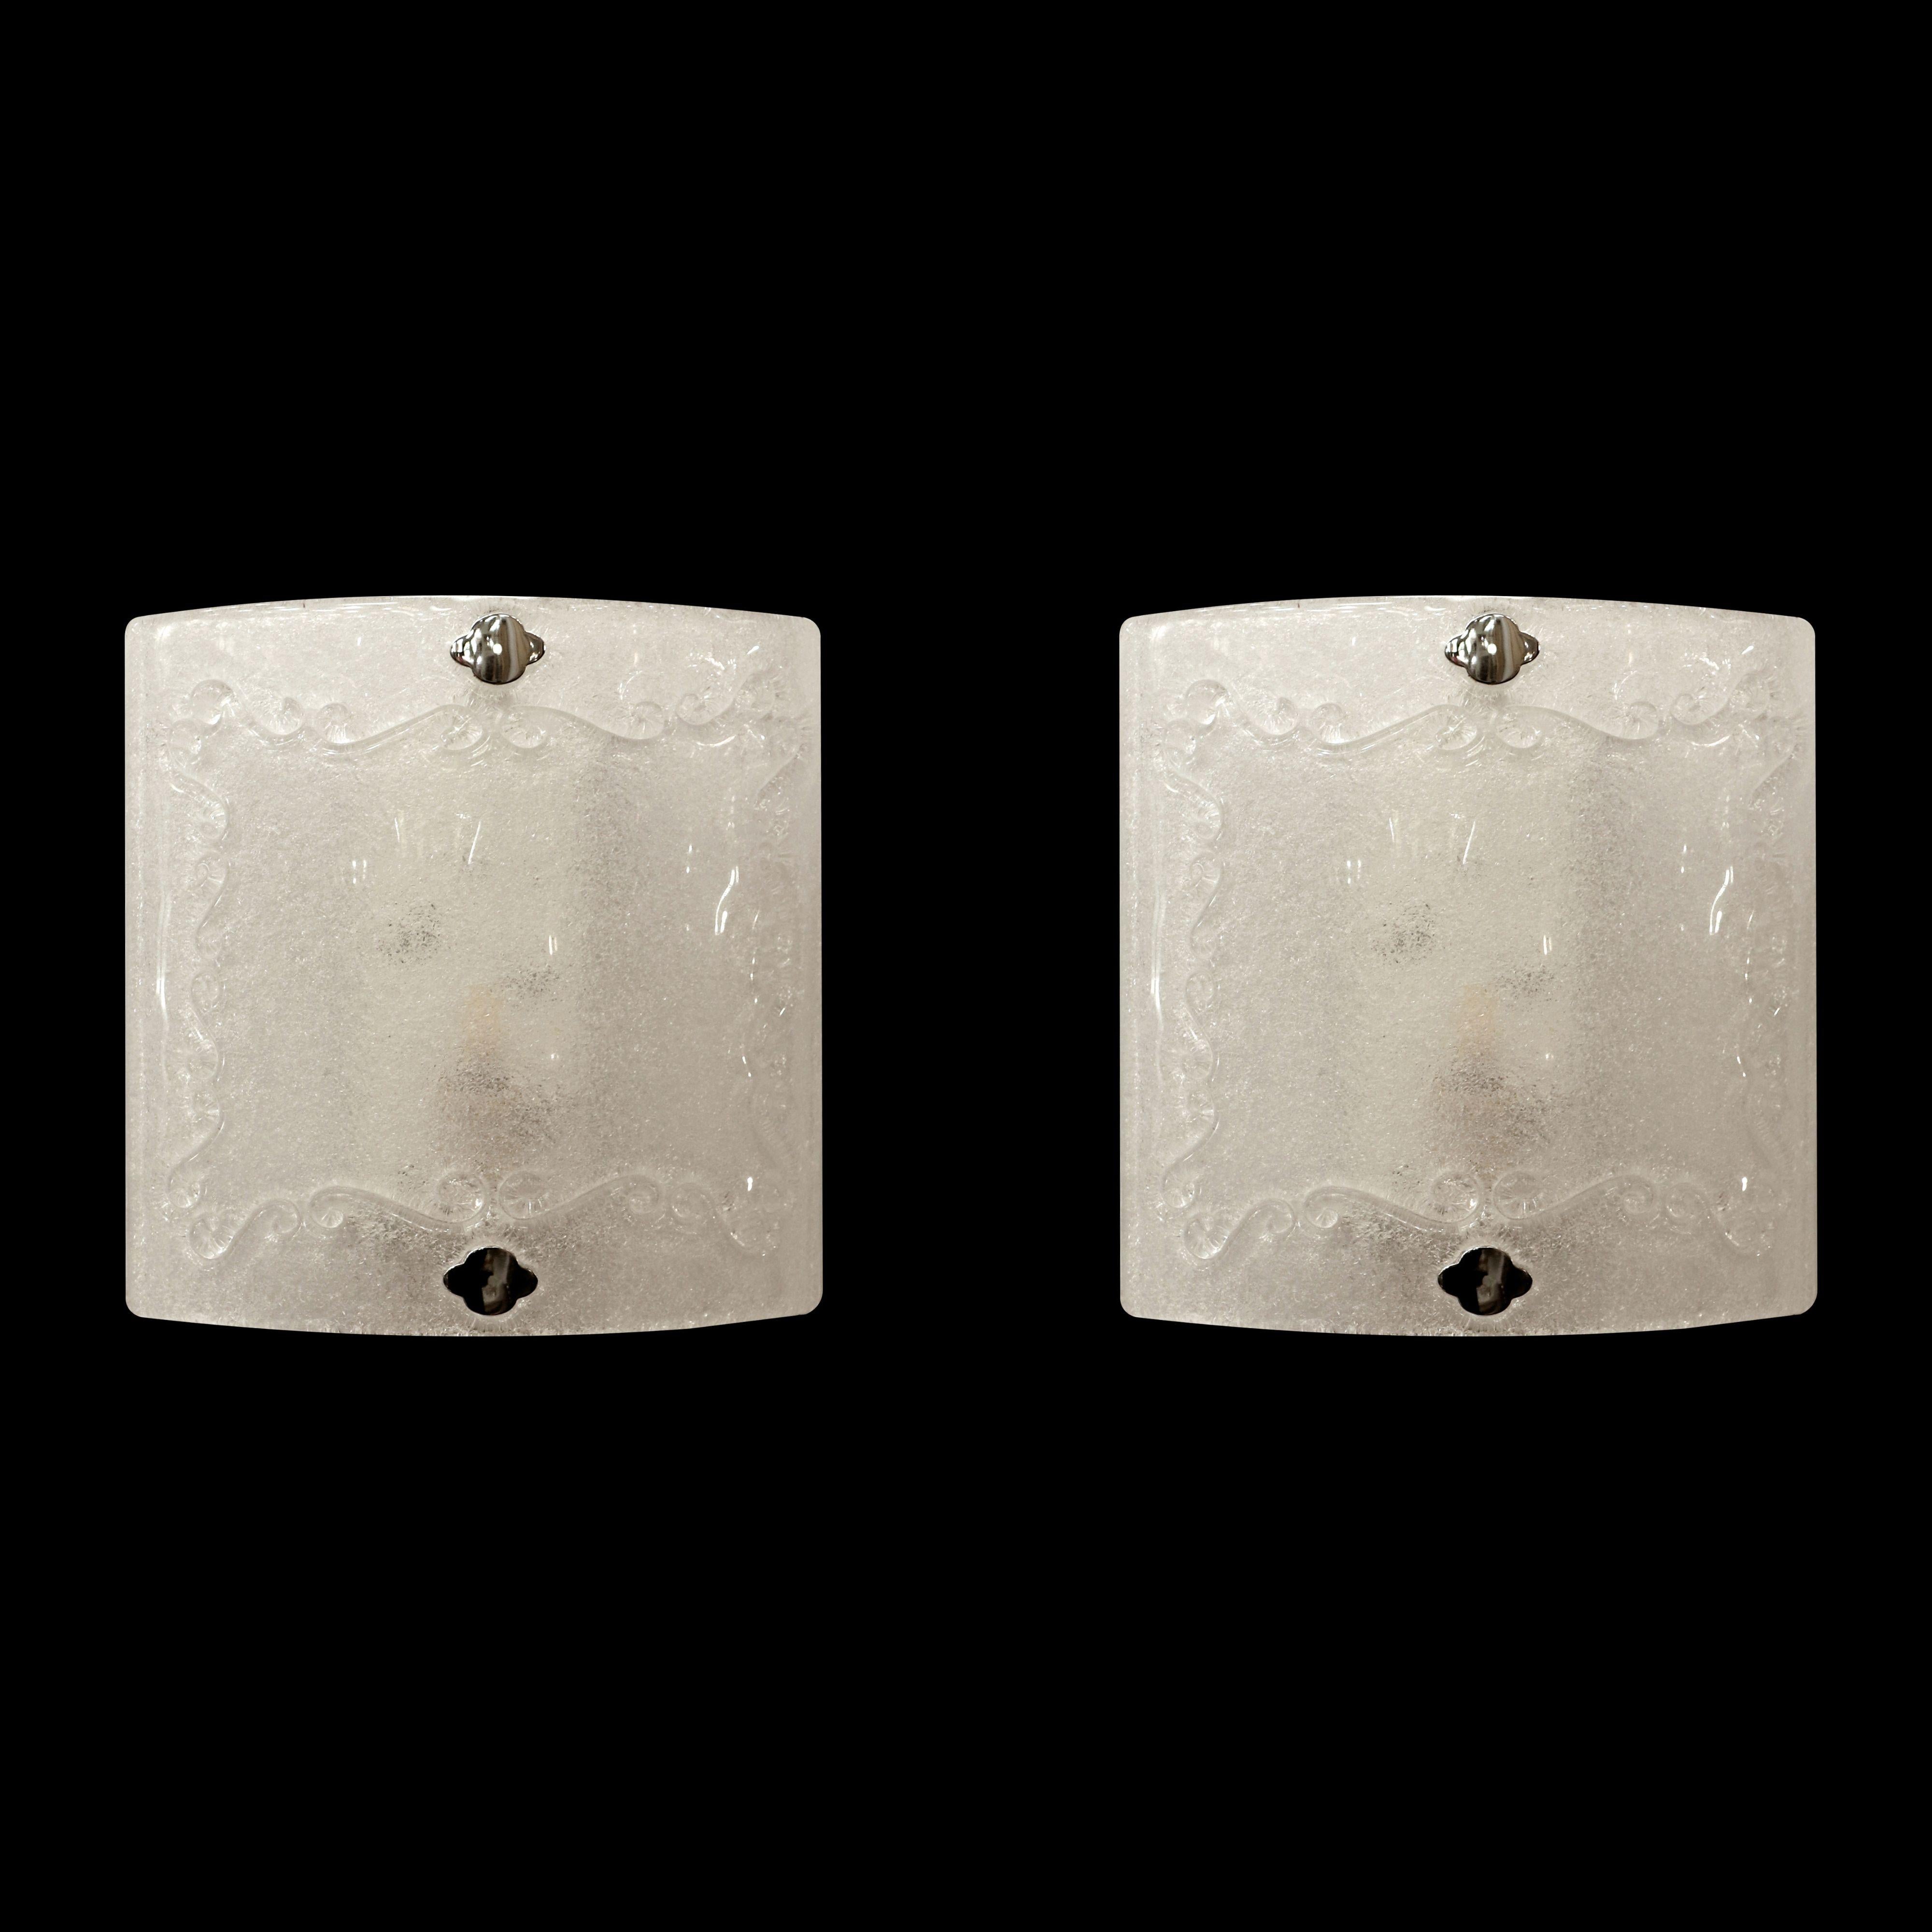 Sandcast Murano textured glass wall sconces with decorative details. These were retrieved from an estate located in Greenwich, Connecticut. The price includes restoration of cleaning and rewiring. Good condition with appropriate wear from age.